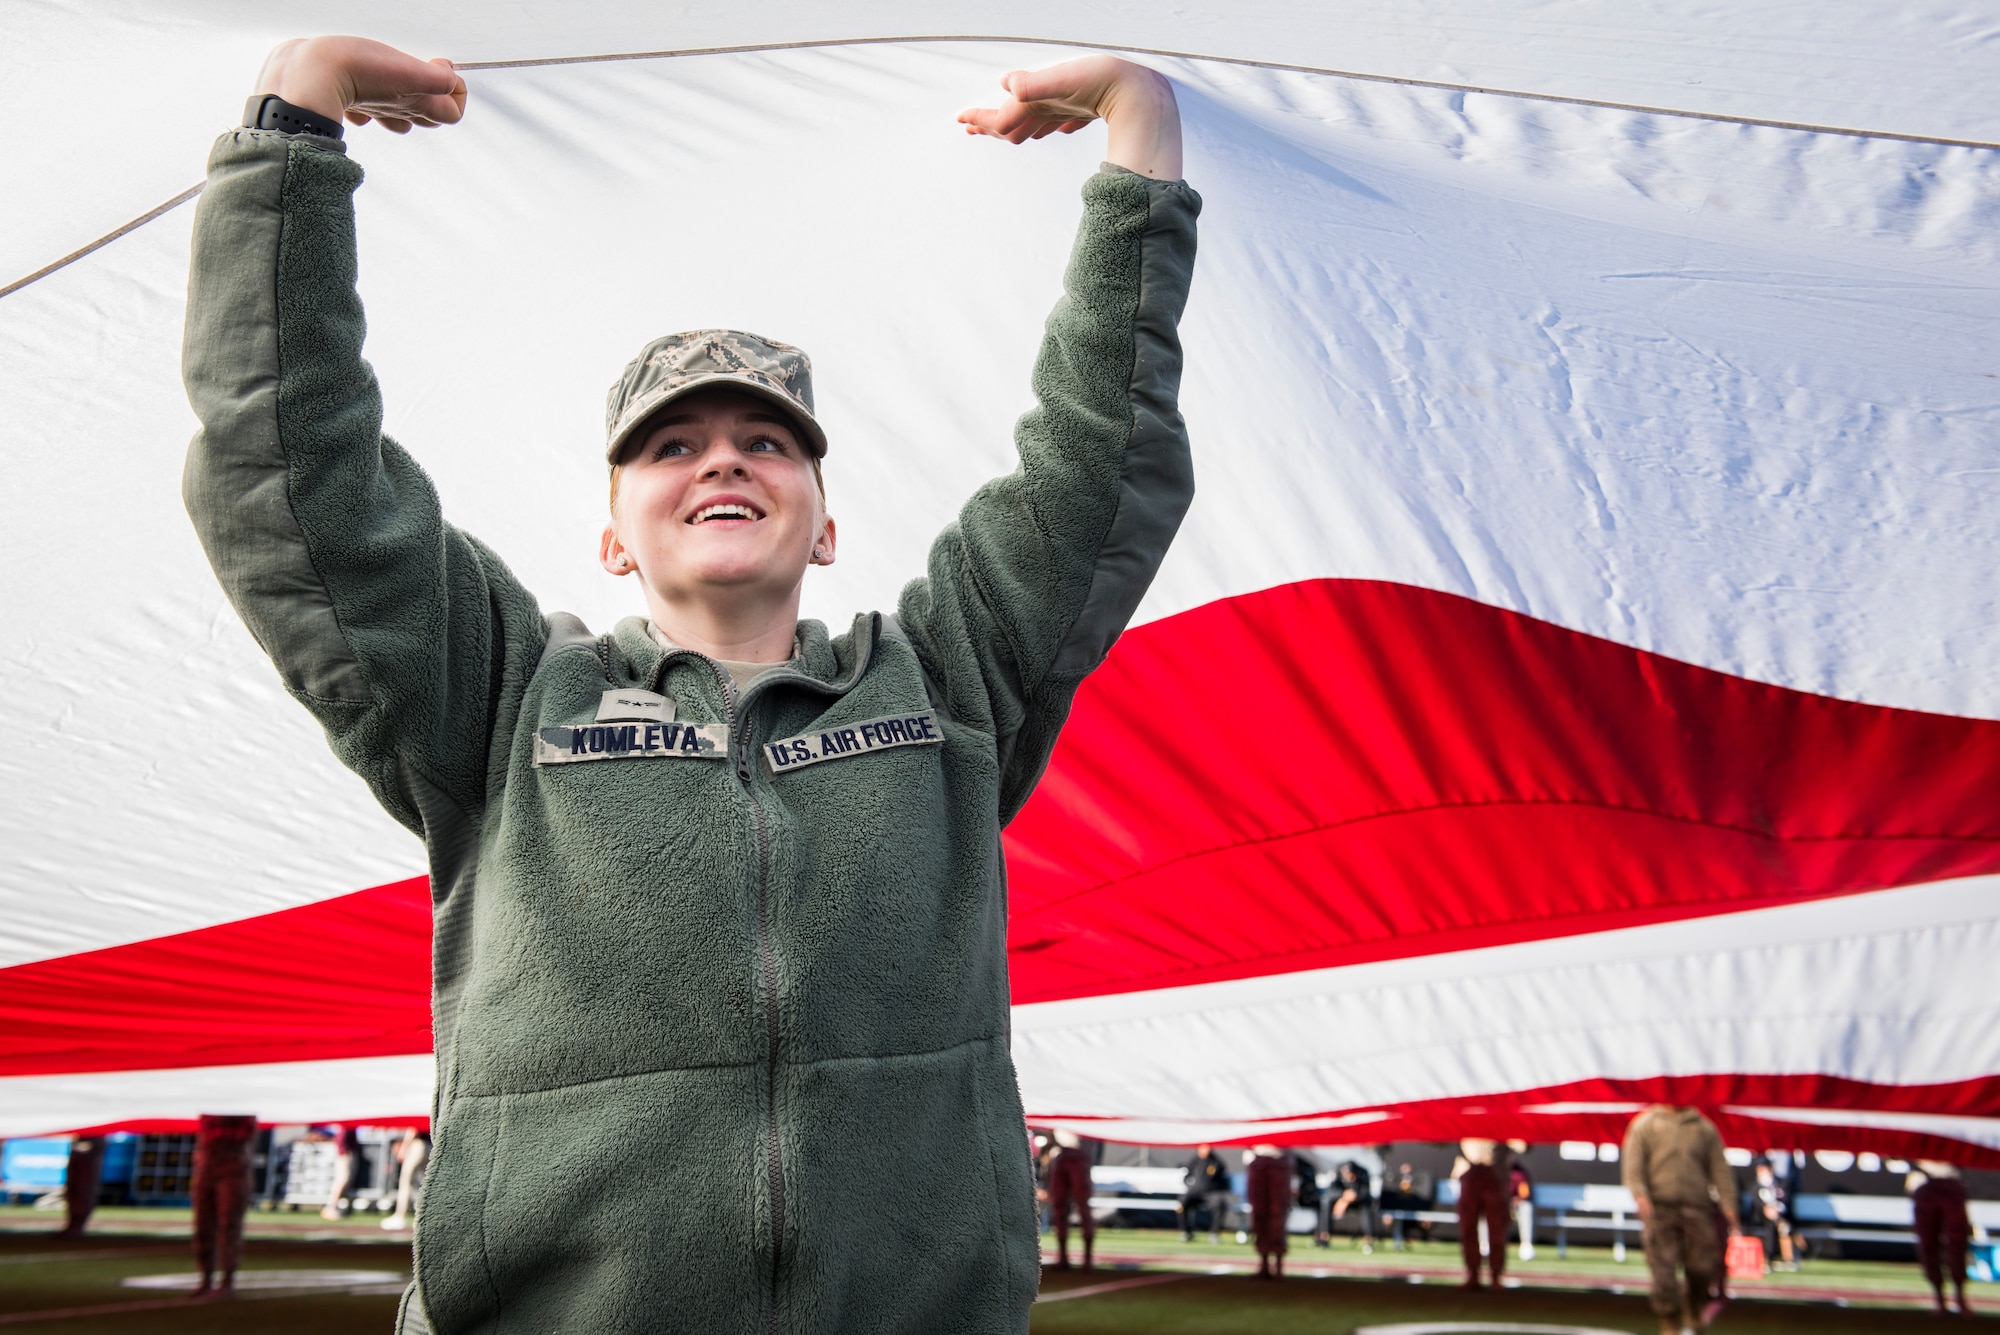 Airman 1st Class Lolita Komleva, a pharmacy technician assigned to the 99th Medical Operations Squadron at Nellis Air Force Base, Nevada, lifts her arms to help keep a half-ton American flag off the ground during the 2018 Las Vegas Bowl opening ceremony at Sam Boyd Stadium in Las Vegas, Dec. 15, 2018. Komleva was one of more than 200 Airmen who volunteered to carry the giant flag. (U.S. Air Force photo by Senior Airman Andrew D. Sarver)